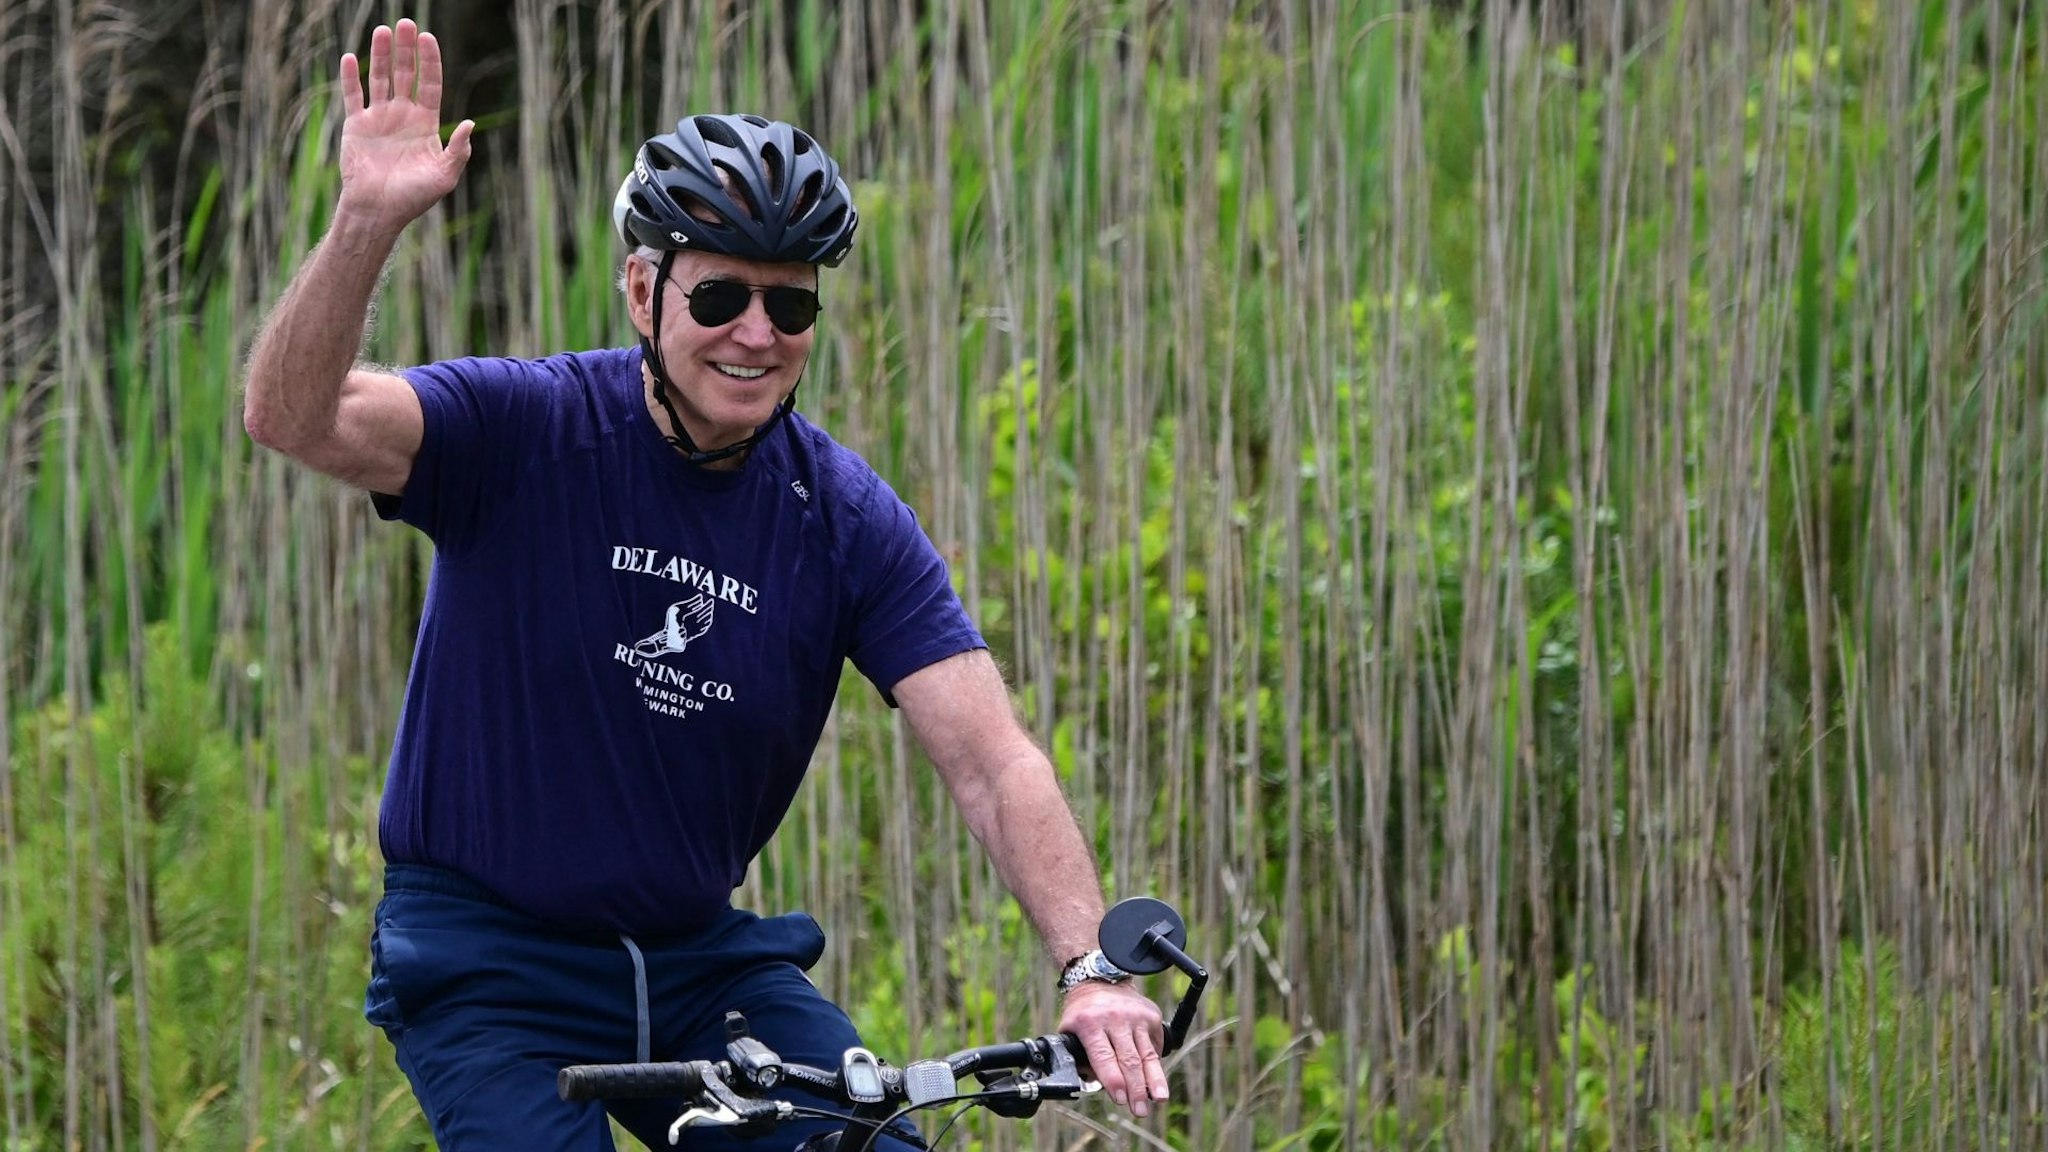 TOPSHOT - US President Joe Biden rides his bicycle in Cape Henlopen State Park on June 3, 2021, in Lewes, Delaware.